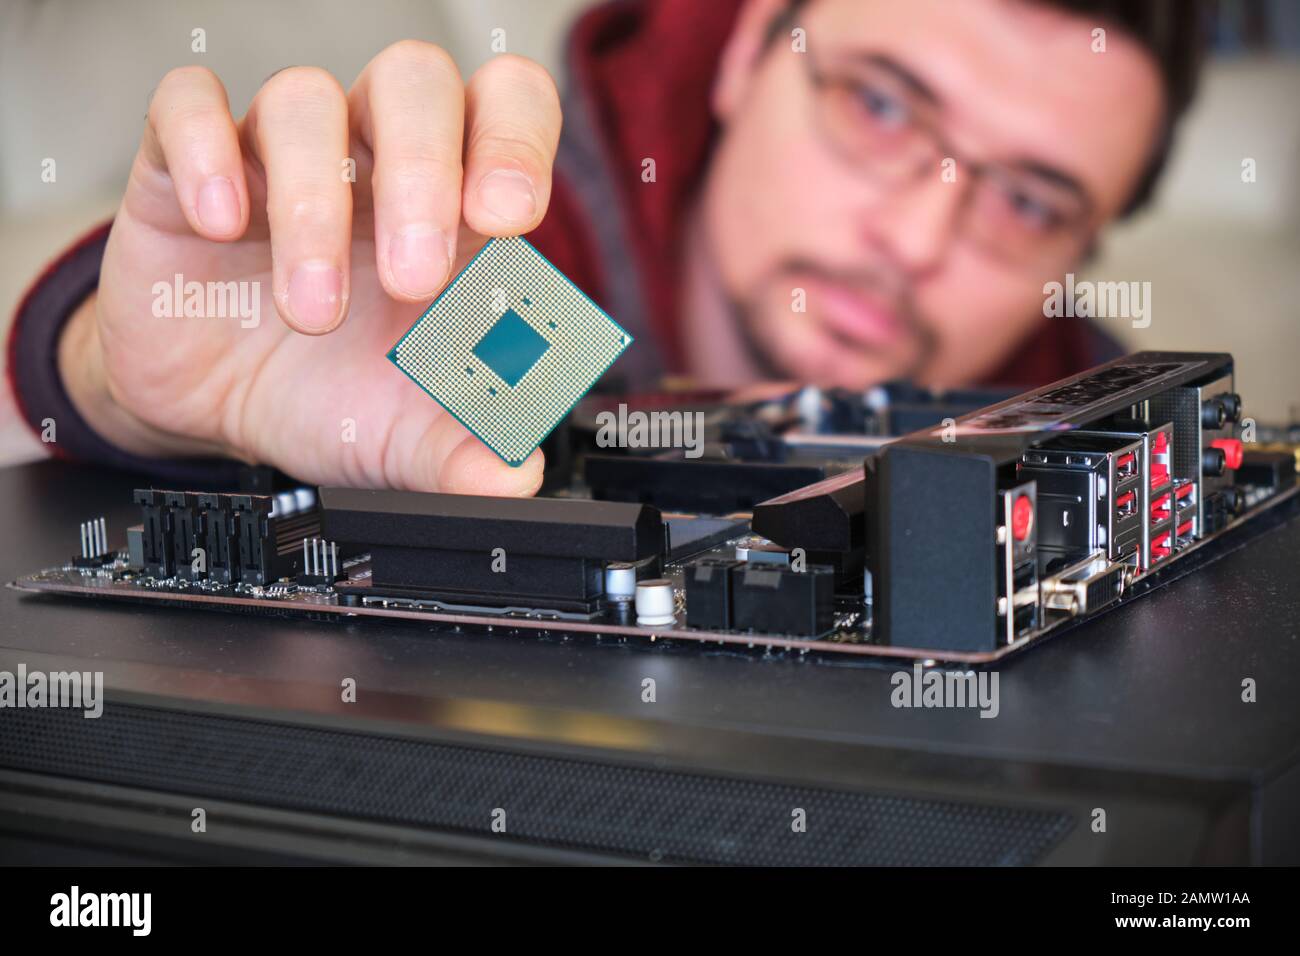 Man examining a computer chip held between his fingers, above a motherboard. Stock Photo